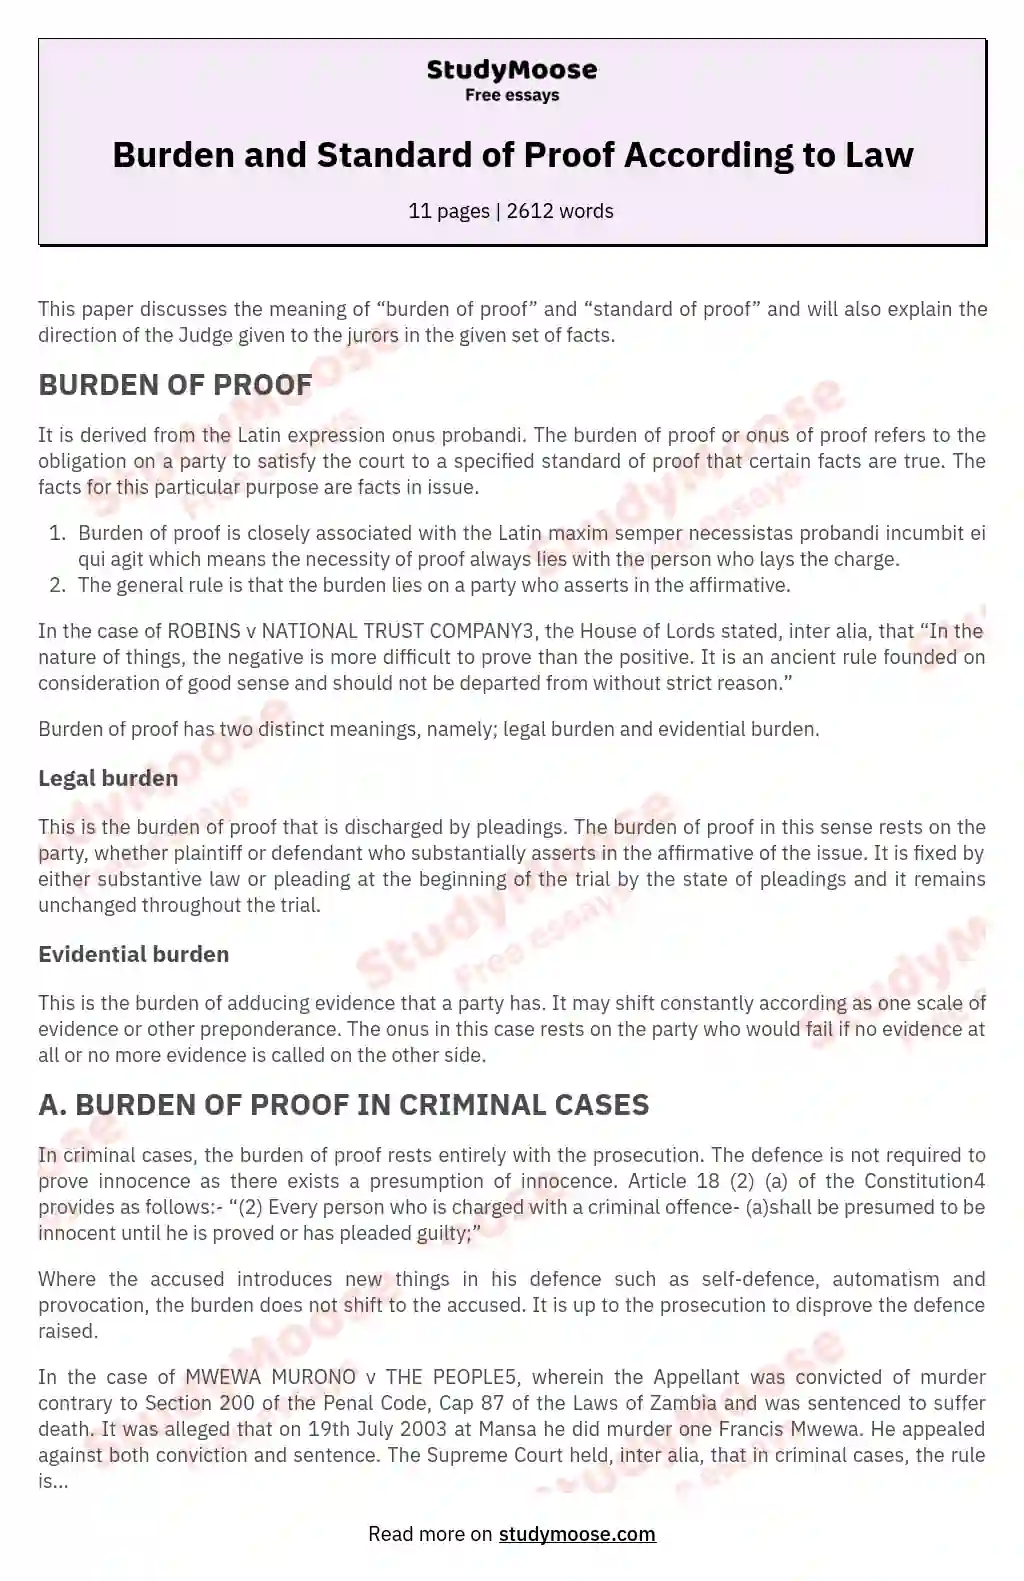 Burden and Standard of Proof According to Law essay